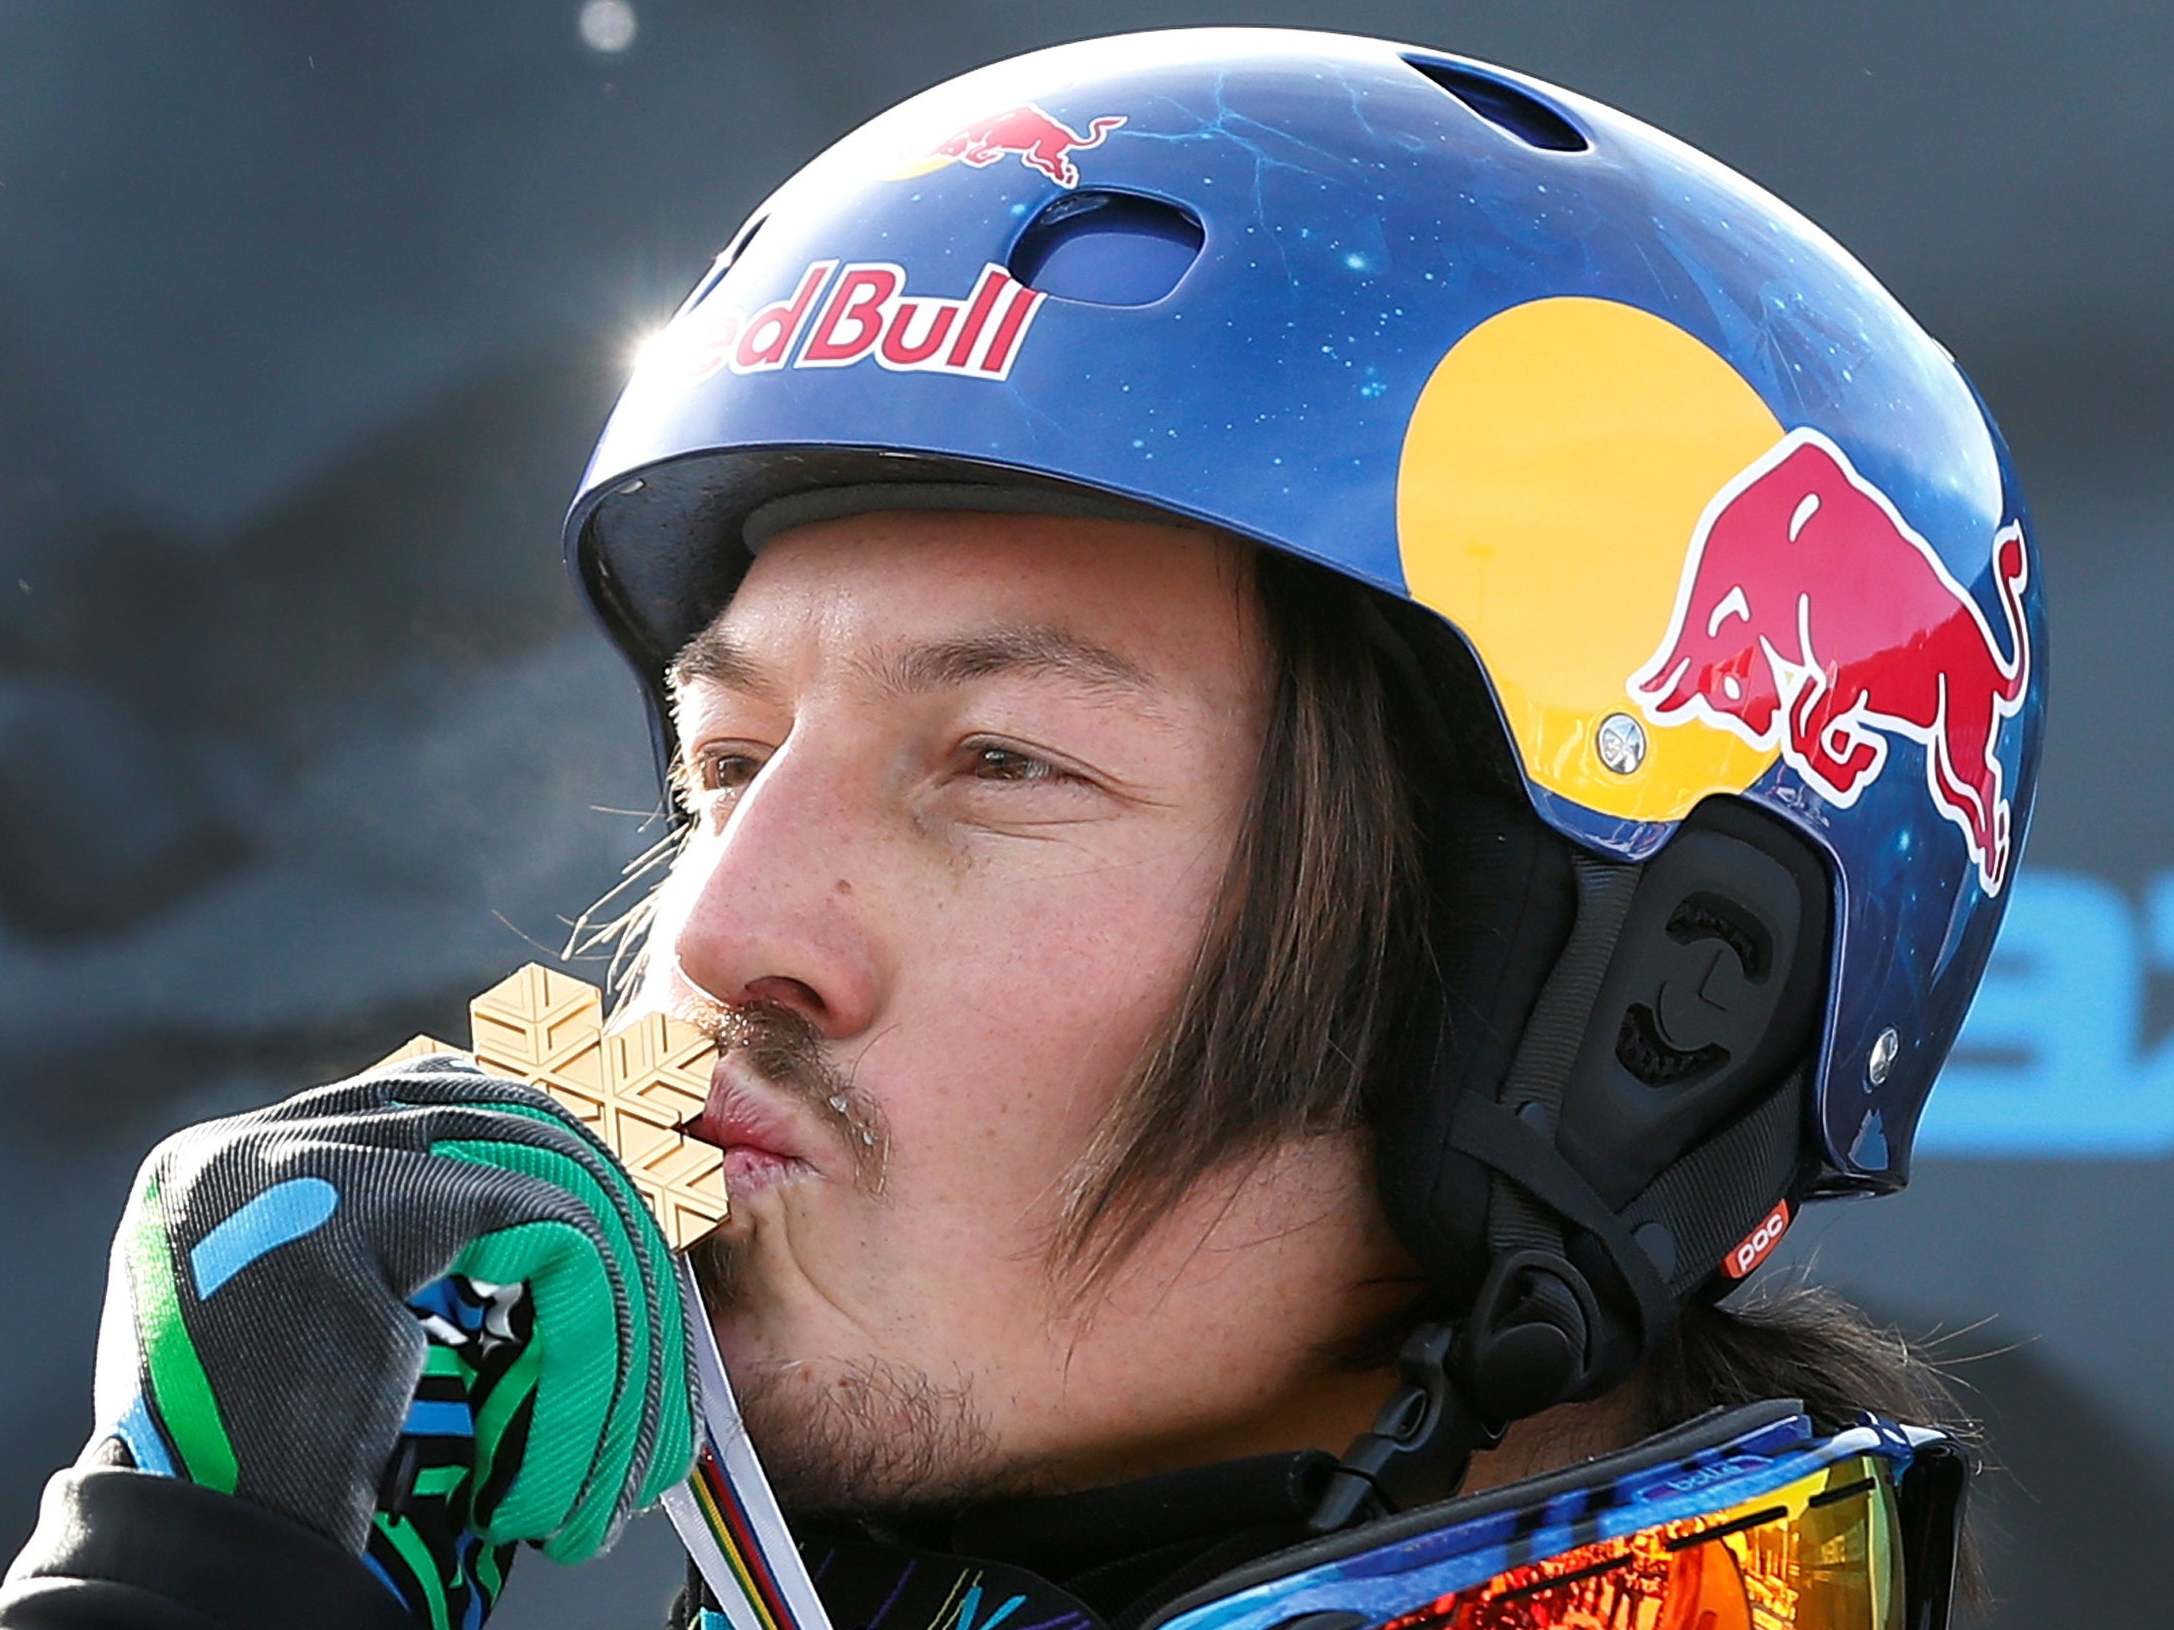 Alex Pullin, two-time snowboard world champion, has died at the age of 32